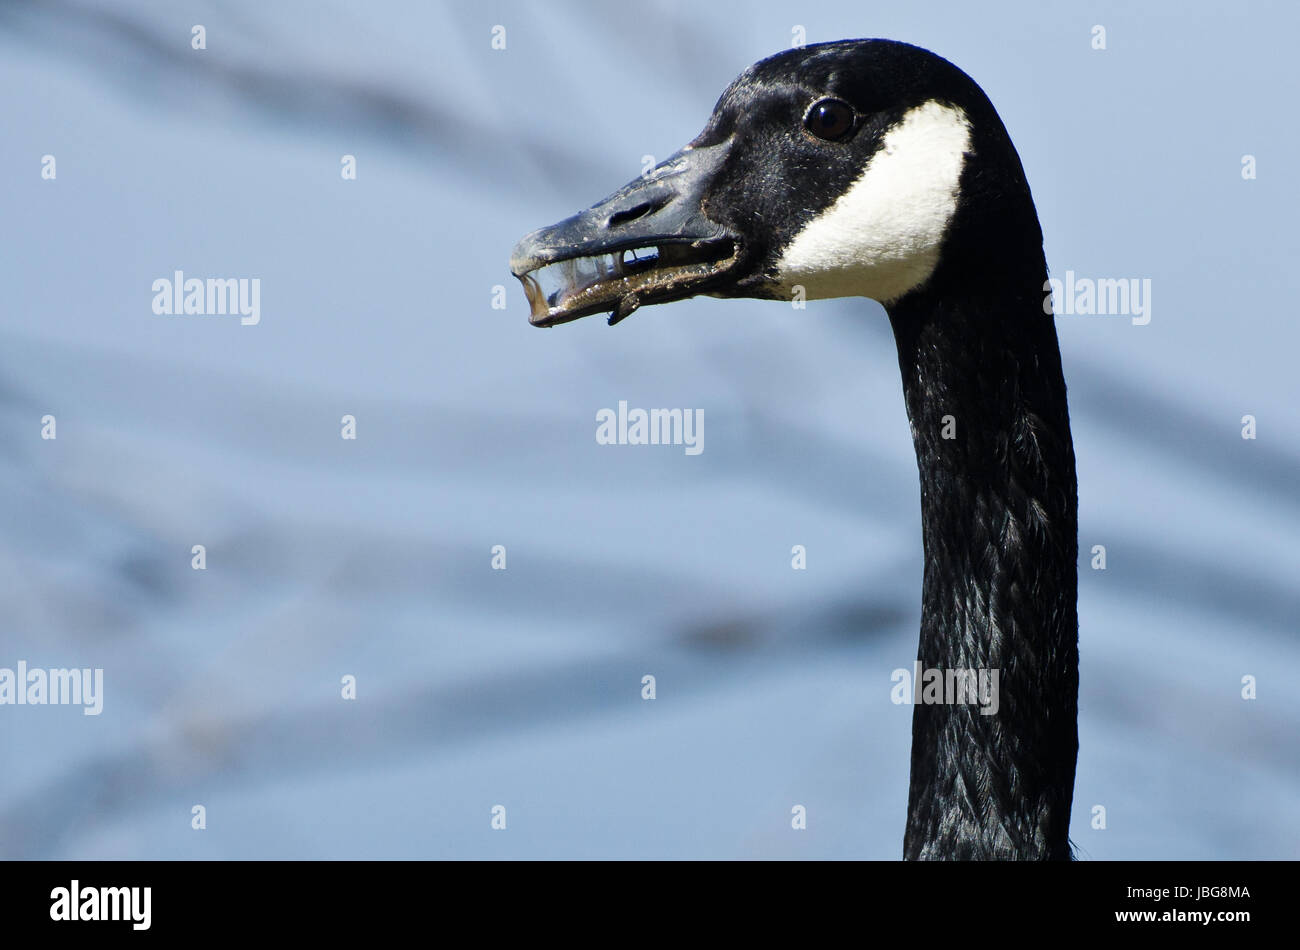 Canada Goose With a Mouth Full of Yuck Stock Photo - Alamy